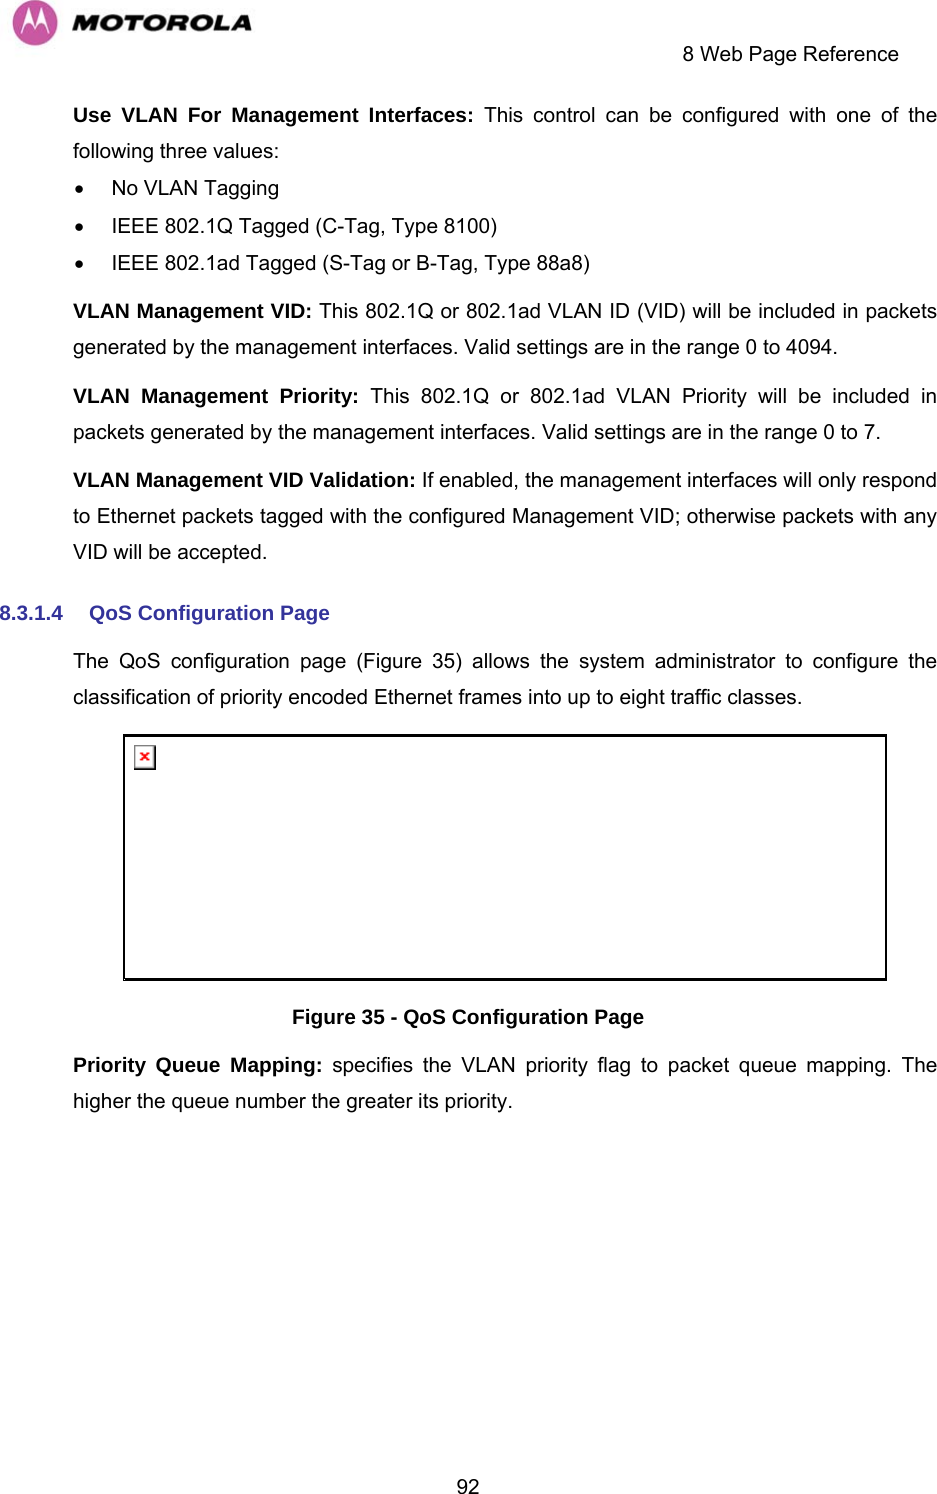     8 Web Page Reference  92Use VLAN For Management Interfaces: This control can be configured with one of the following three values: •  No VLAN Tagging •  IEEE 802.1Q Tagged (C-Tag, Type 8100) •  IEEE 802.1ad Tagged (S-Tag or B-Tag, Type 88a8) VLAN Management VID: This 802.1Q or 802.1ad VLAN ID (VID) will be included in packets generated by the management interfaces. Valid settings are in the range 0 to 4094. VLAN Management Priority: This 802.1Q or 802.1ad VLAN Priority will be included in packets generated by the management interfaces. Valid settings are in the range 0 to 7. VLAN Management VID Validation: If enabled, the management interfaces will only respond to Ethernet packets tagged with the configured Management VID; otherwise packets with any VID will be accepted. 8.3.1.4  QoS Configuration Page The QoS configuration page (Figure 35) allows the system administrator to configure the classification of priority encoded Ethernet frames into up to eight traffic classes.  Figure 35 - QoS Configuration Page Priority Queue Mapping: specifies the VLAN priority flag to packet queue mapping. The higher the queue number the greater its priority. 